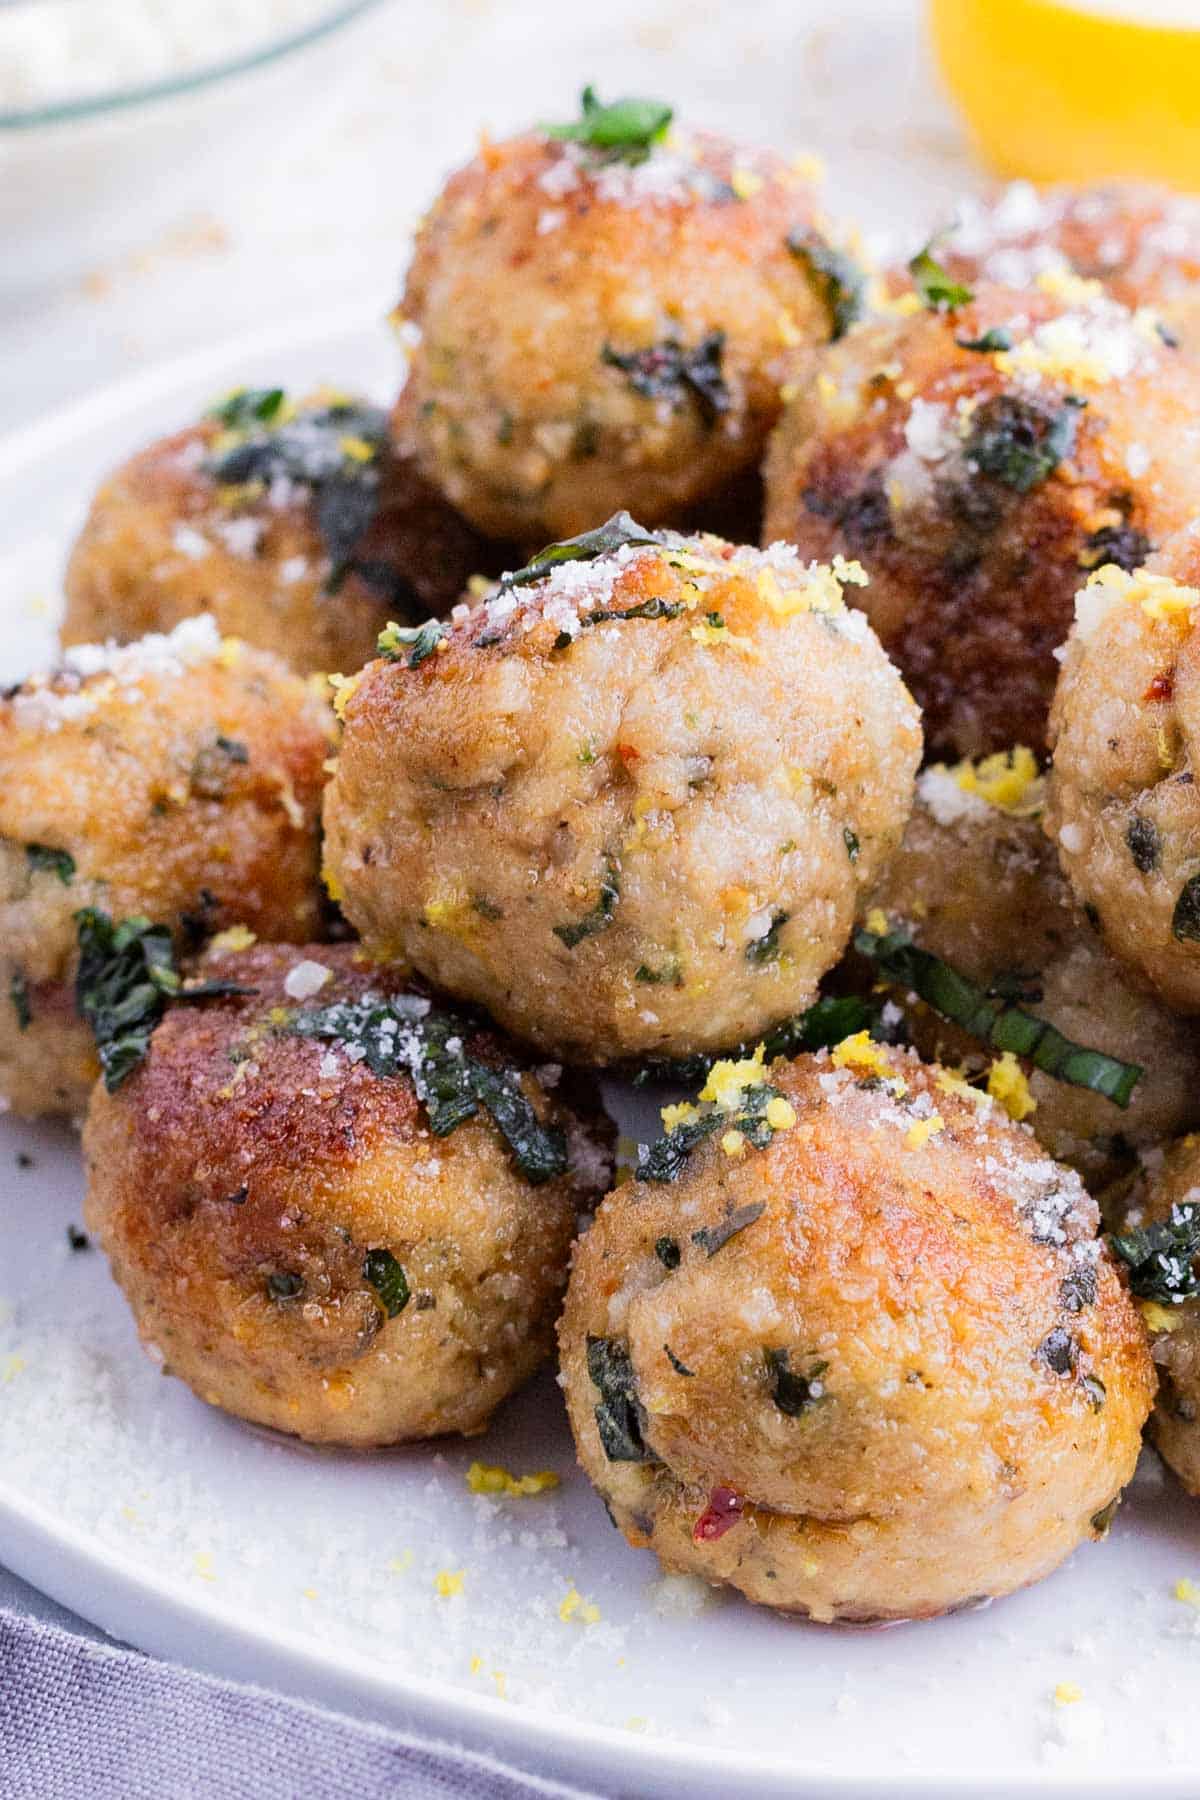 Meatballs are made with ground chicken and Parmesan cheese and served as an appetizer.